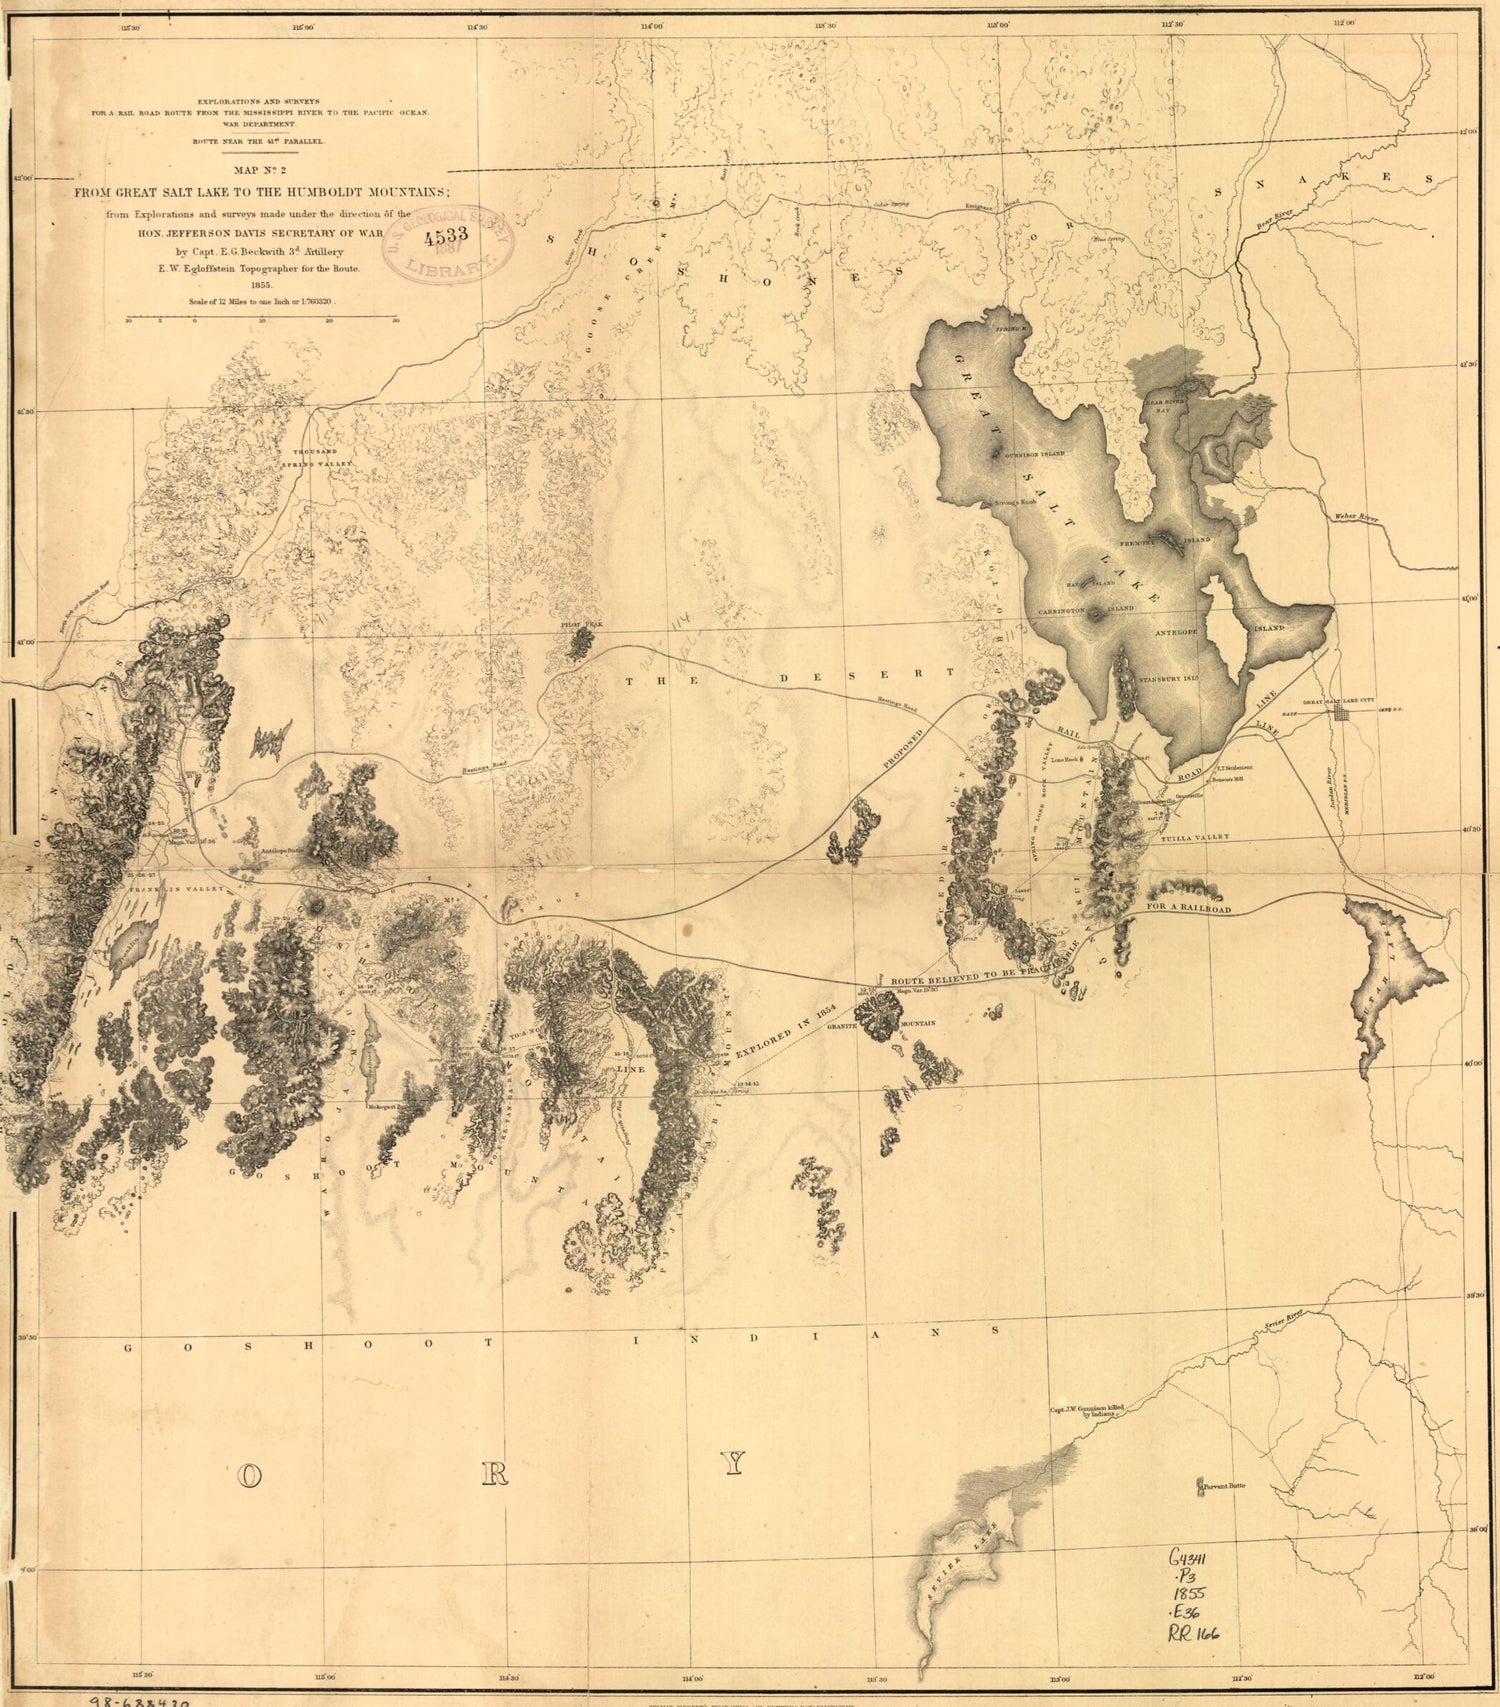 This old map of From Great Salt Lake to the Humboldt Mountains from 1855 was created by E. G. (Edward Griffin) Beckwith, Jefferson Davis, F. W. Egloffstein, Selmar Siebert,  United States. War Department in 1855